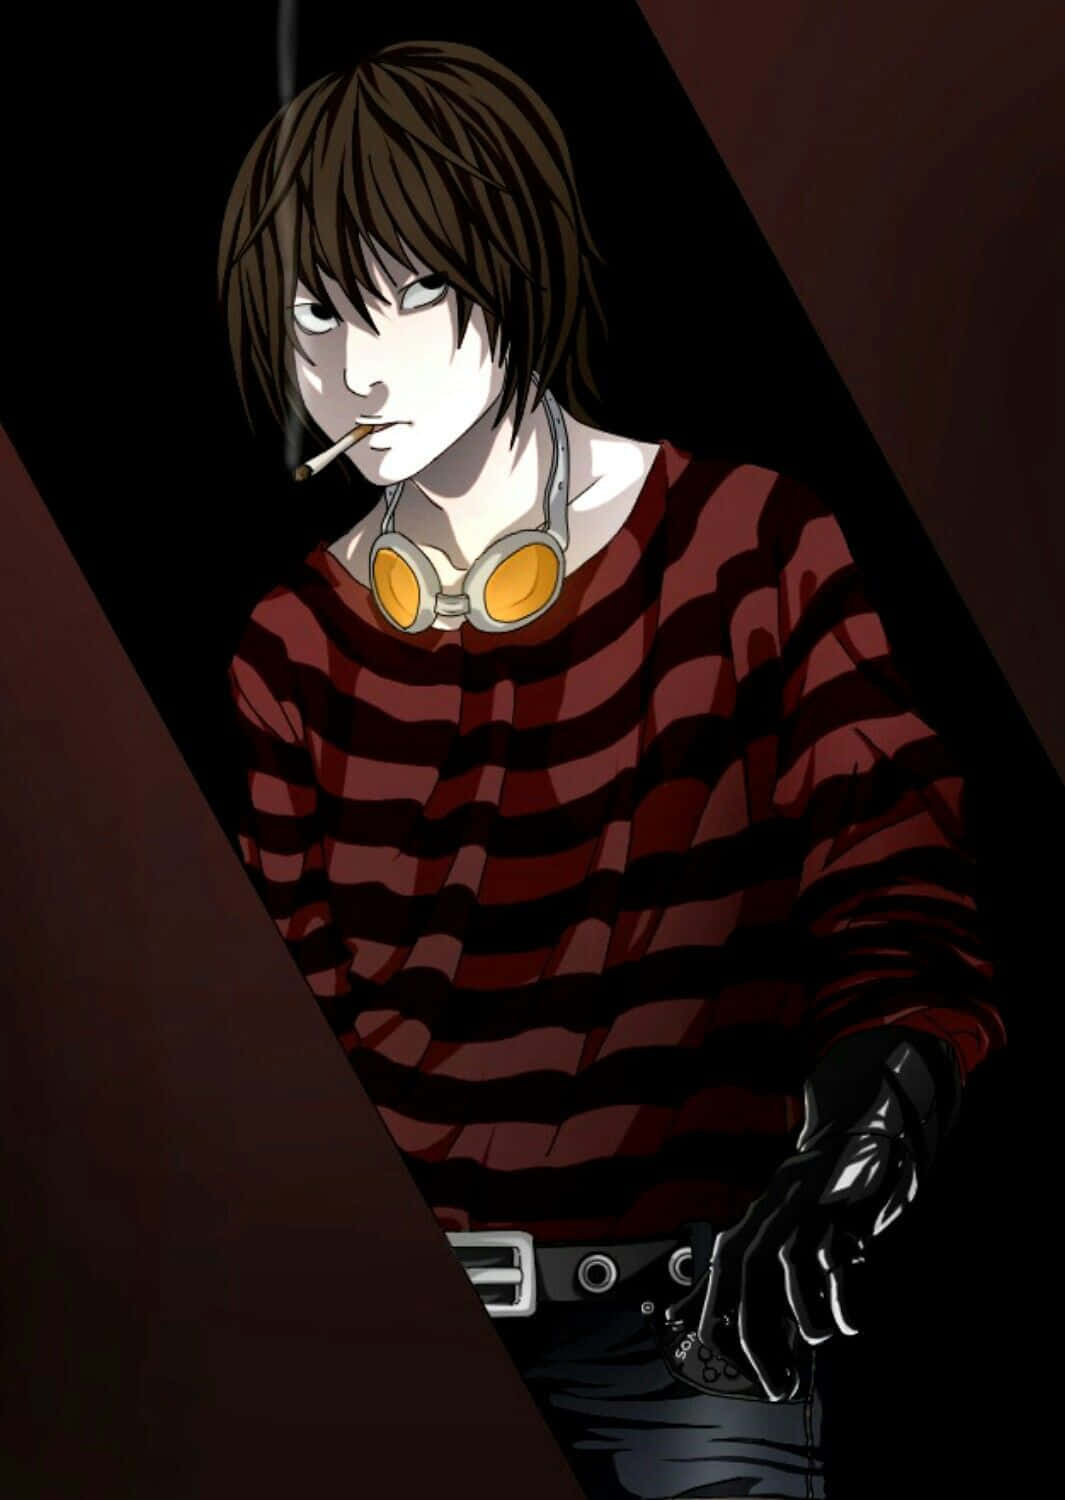 Matt from Death Note with a mischievous smile and his gaming goggles Wallpaper